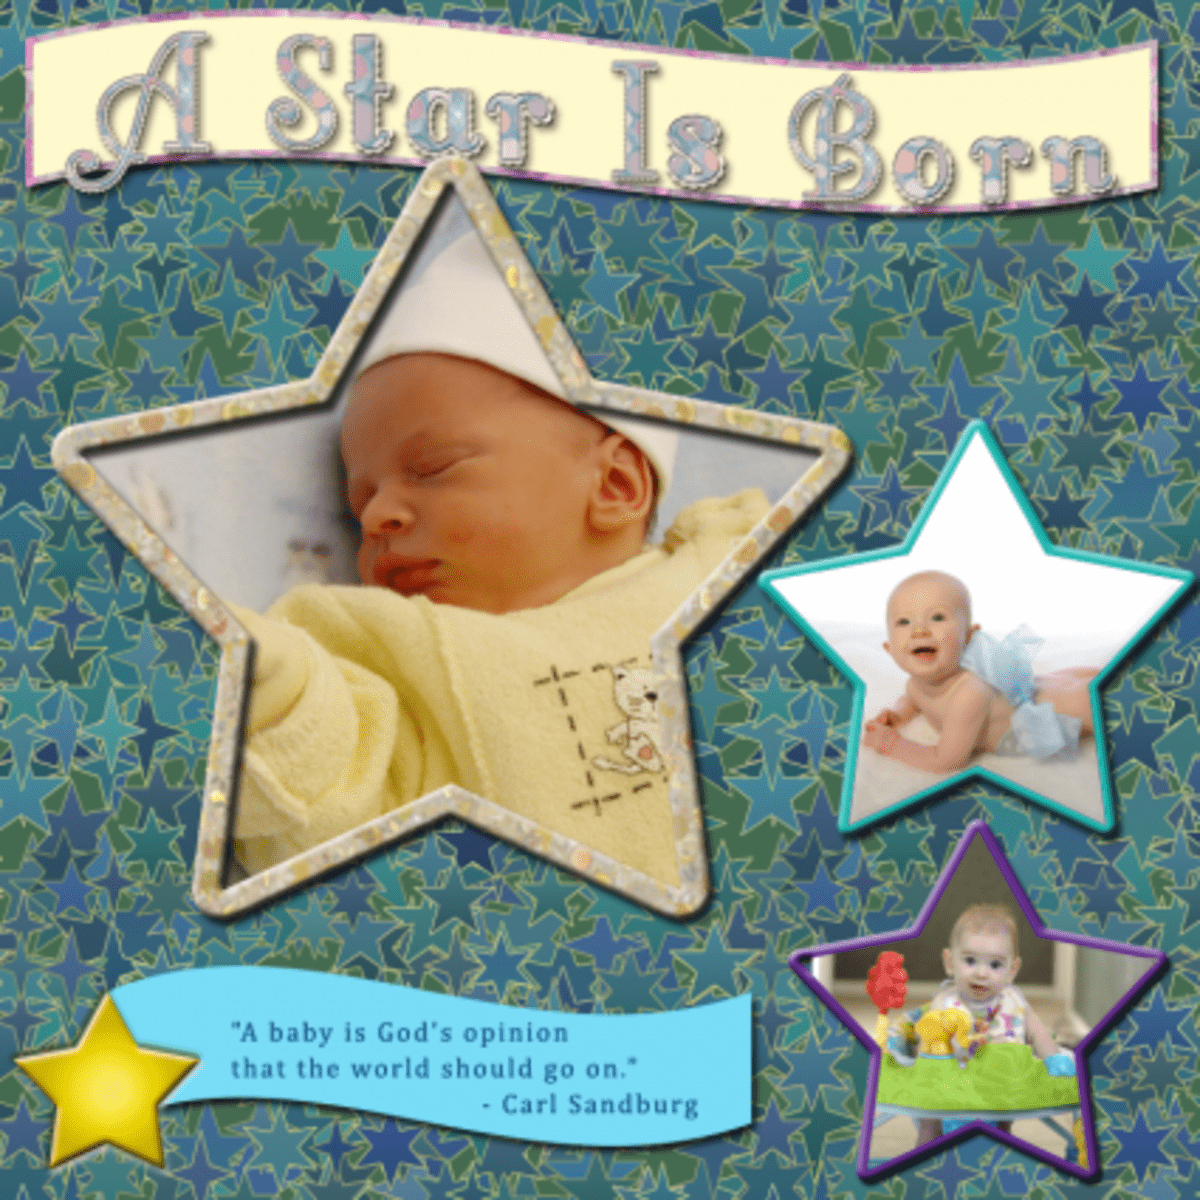 Baby Quotes and Poems for Scrapbooking